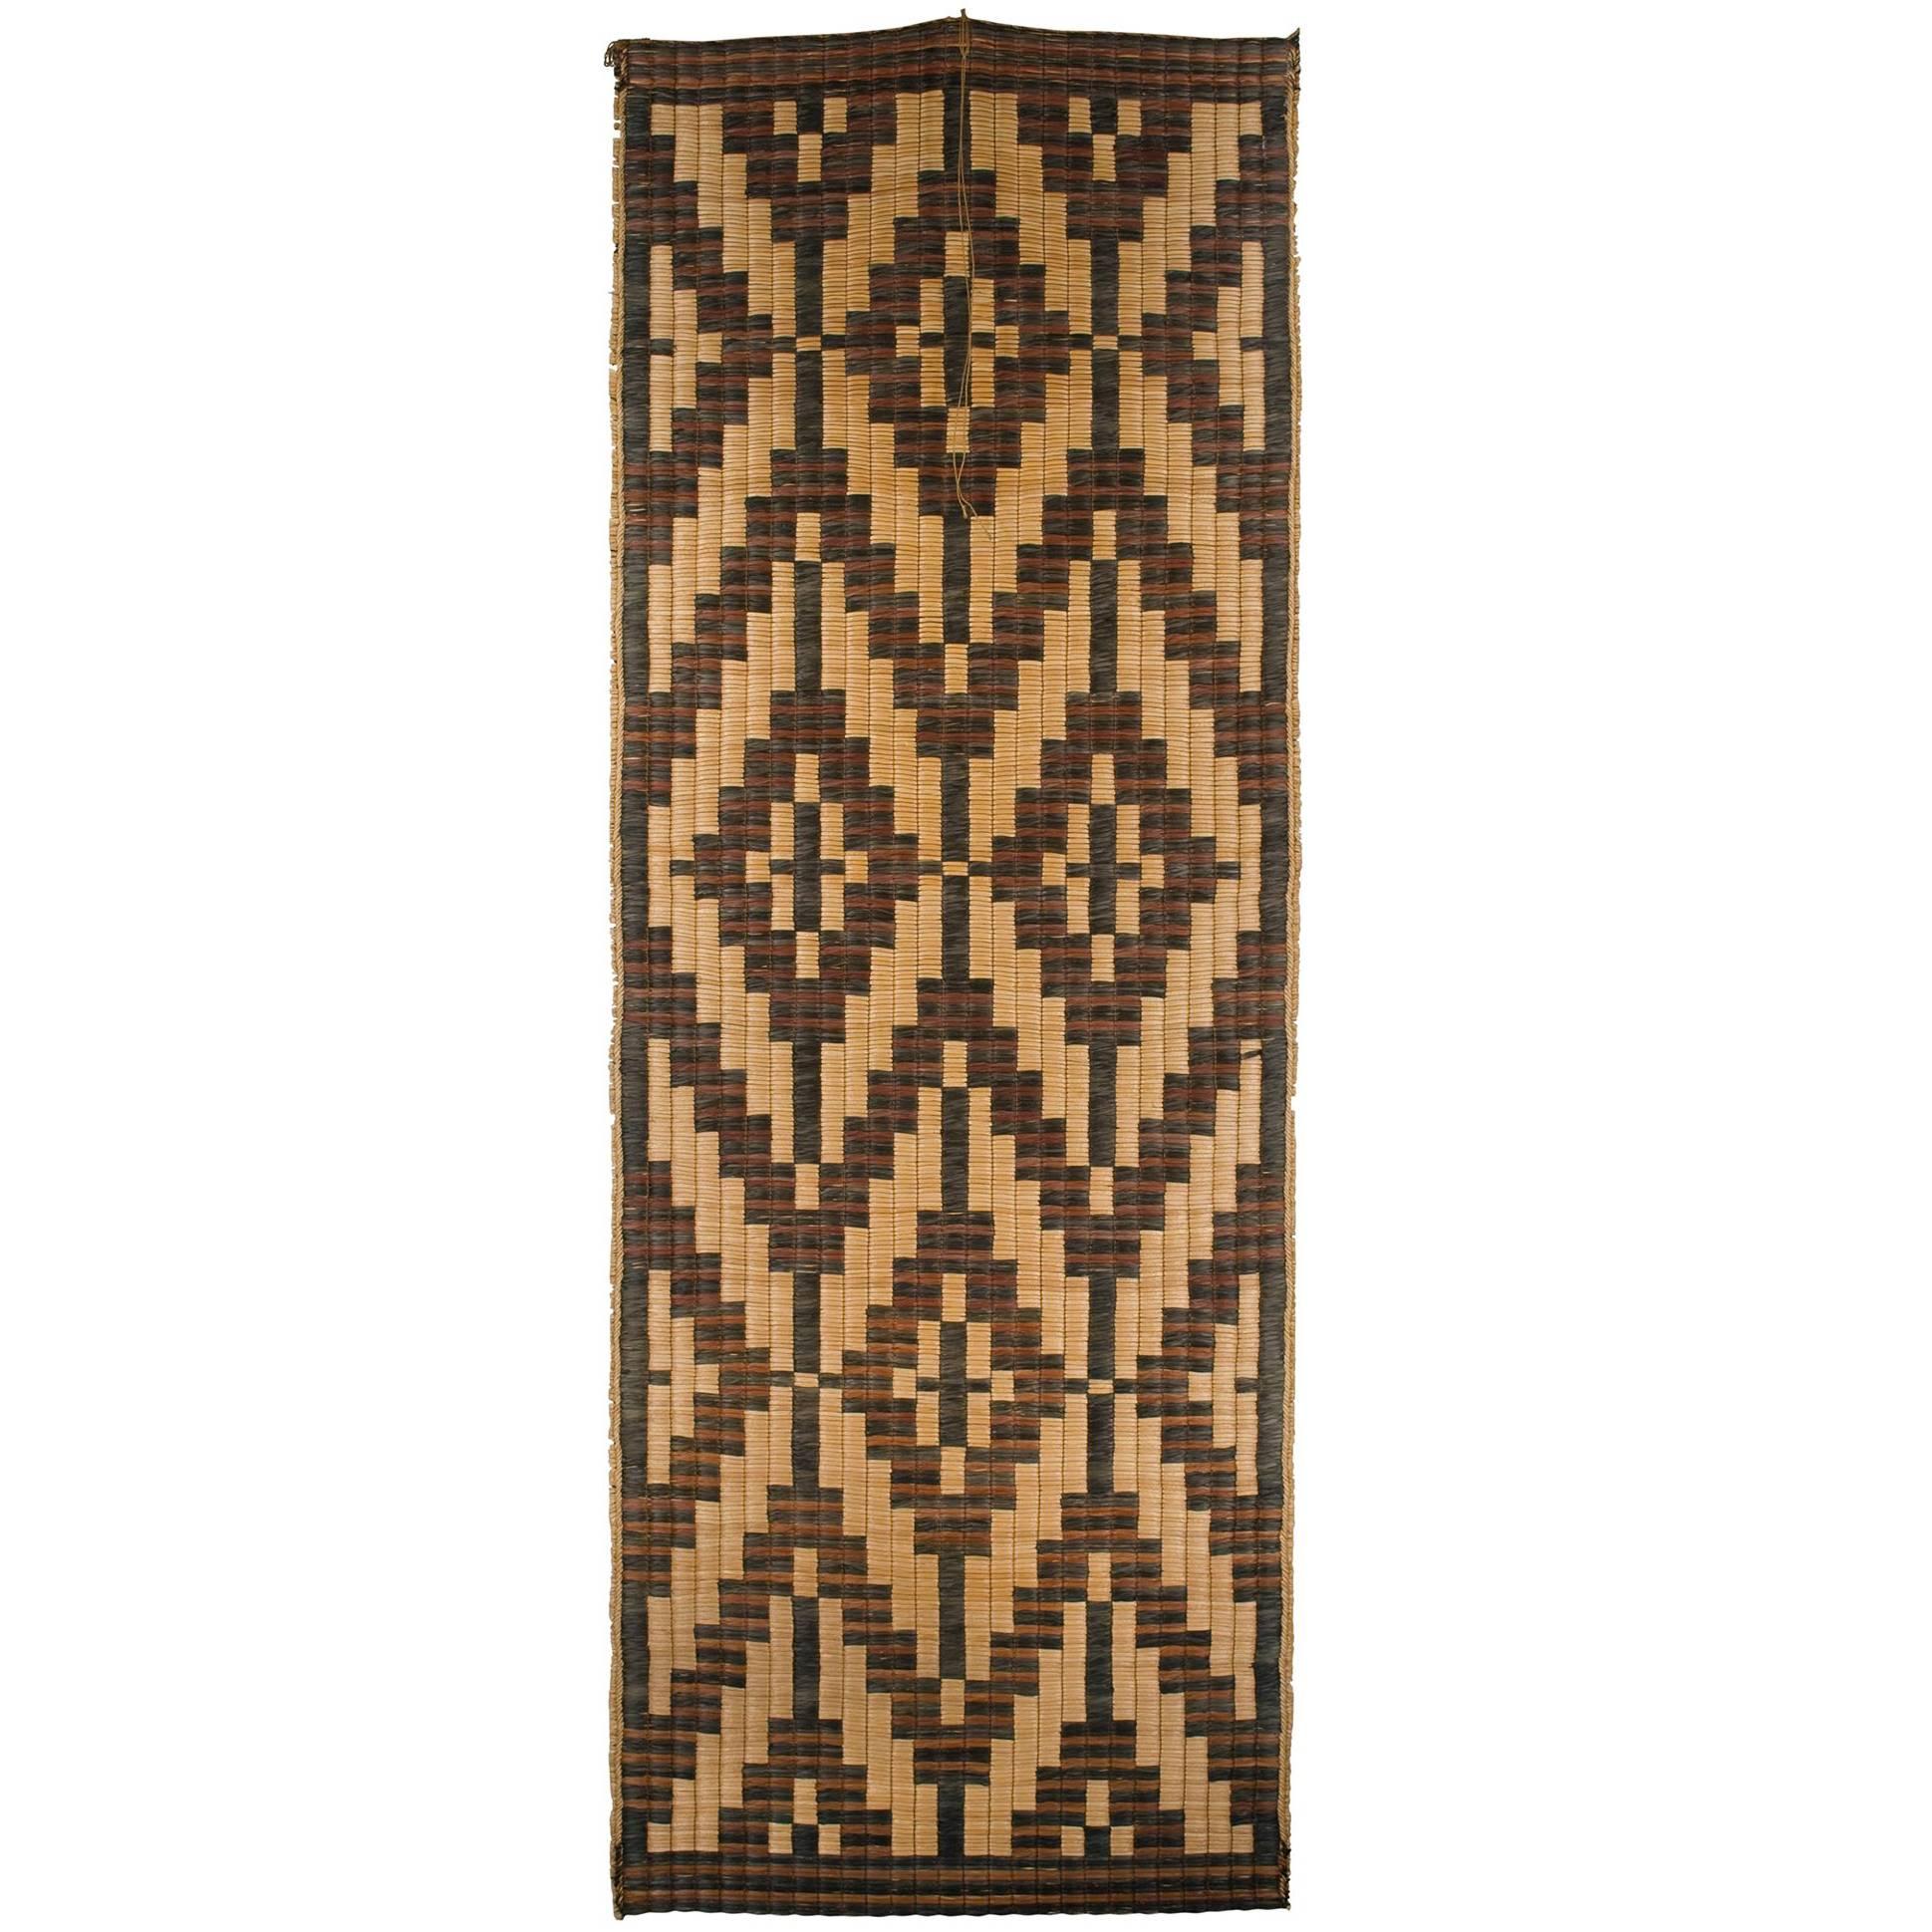 Early 20th Century Woven Mat, Ainu Culture, Japan